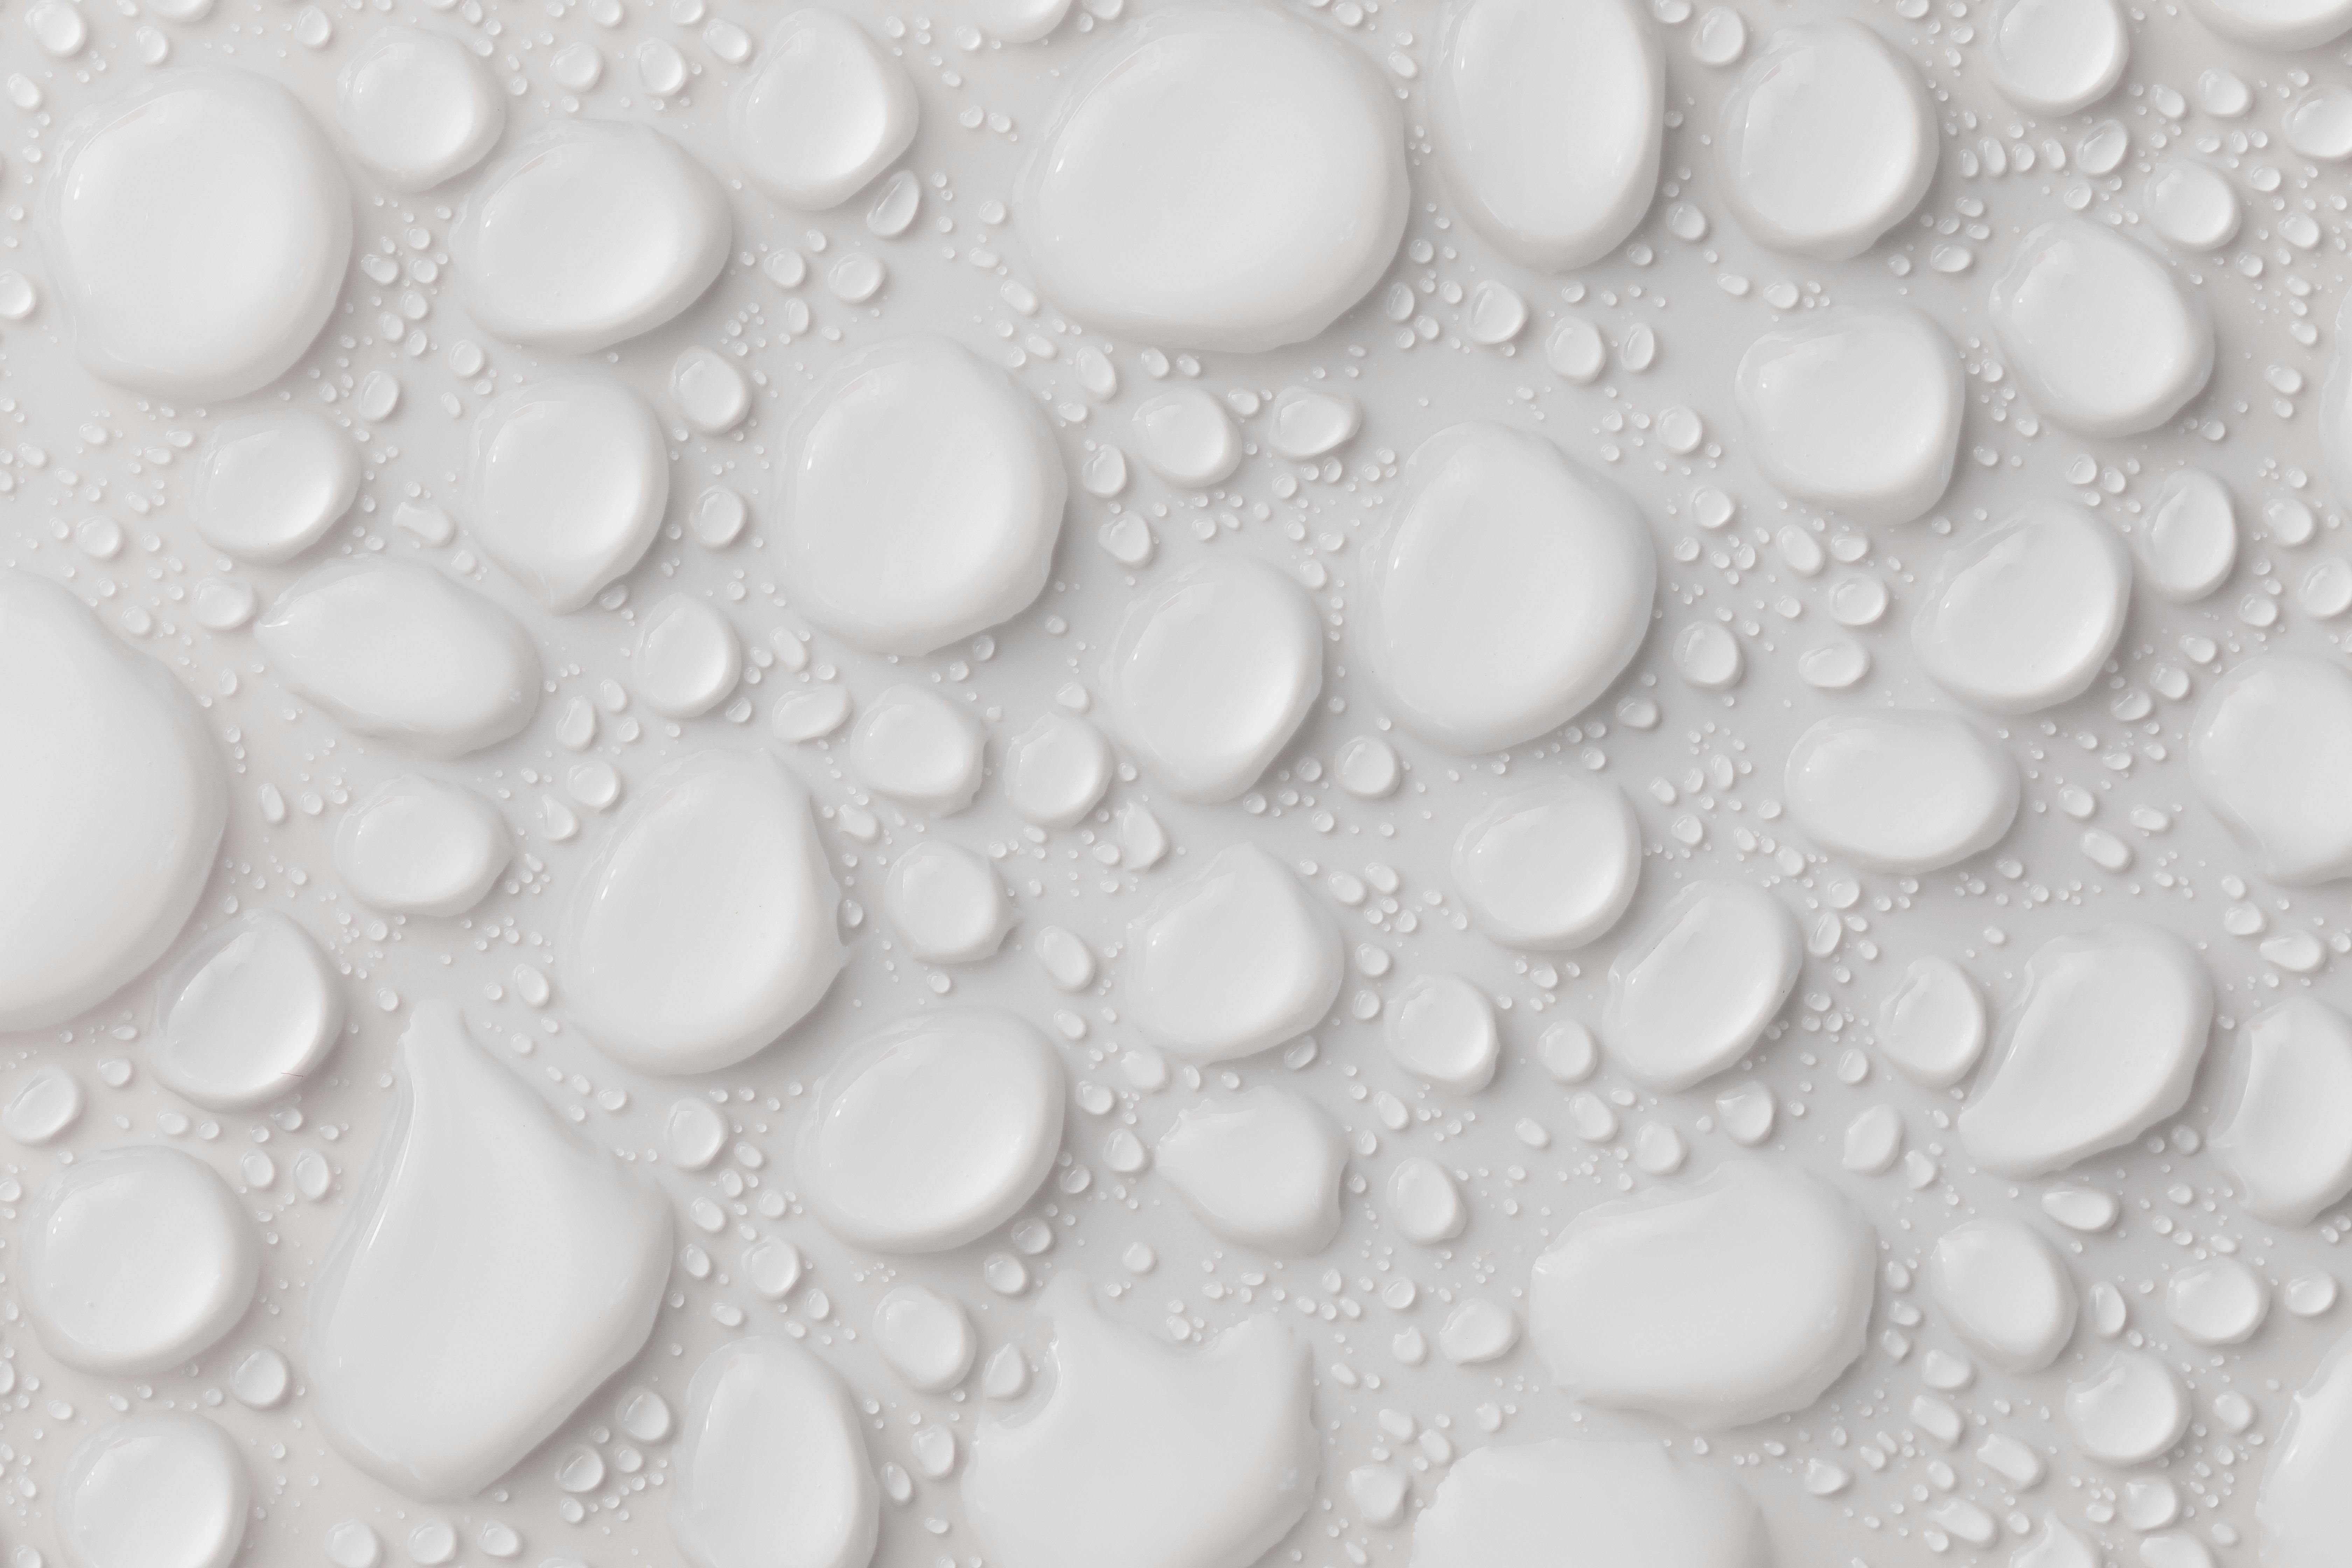 abstract background with white glassy drops